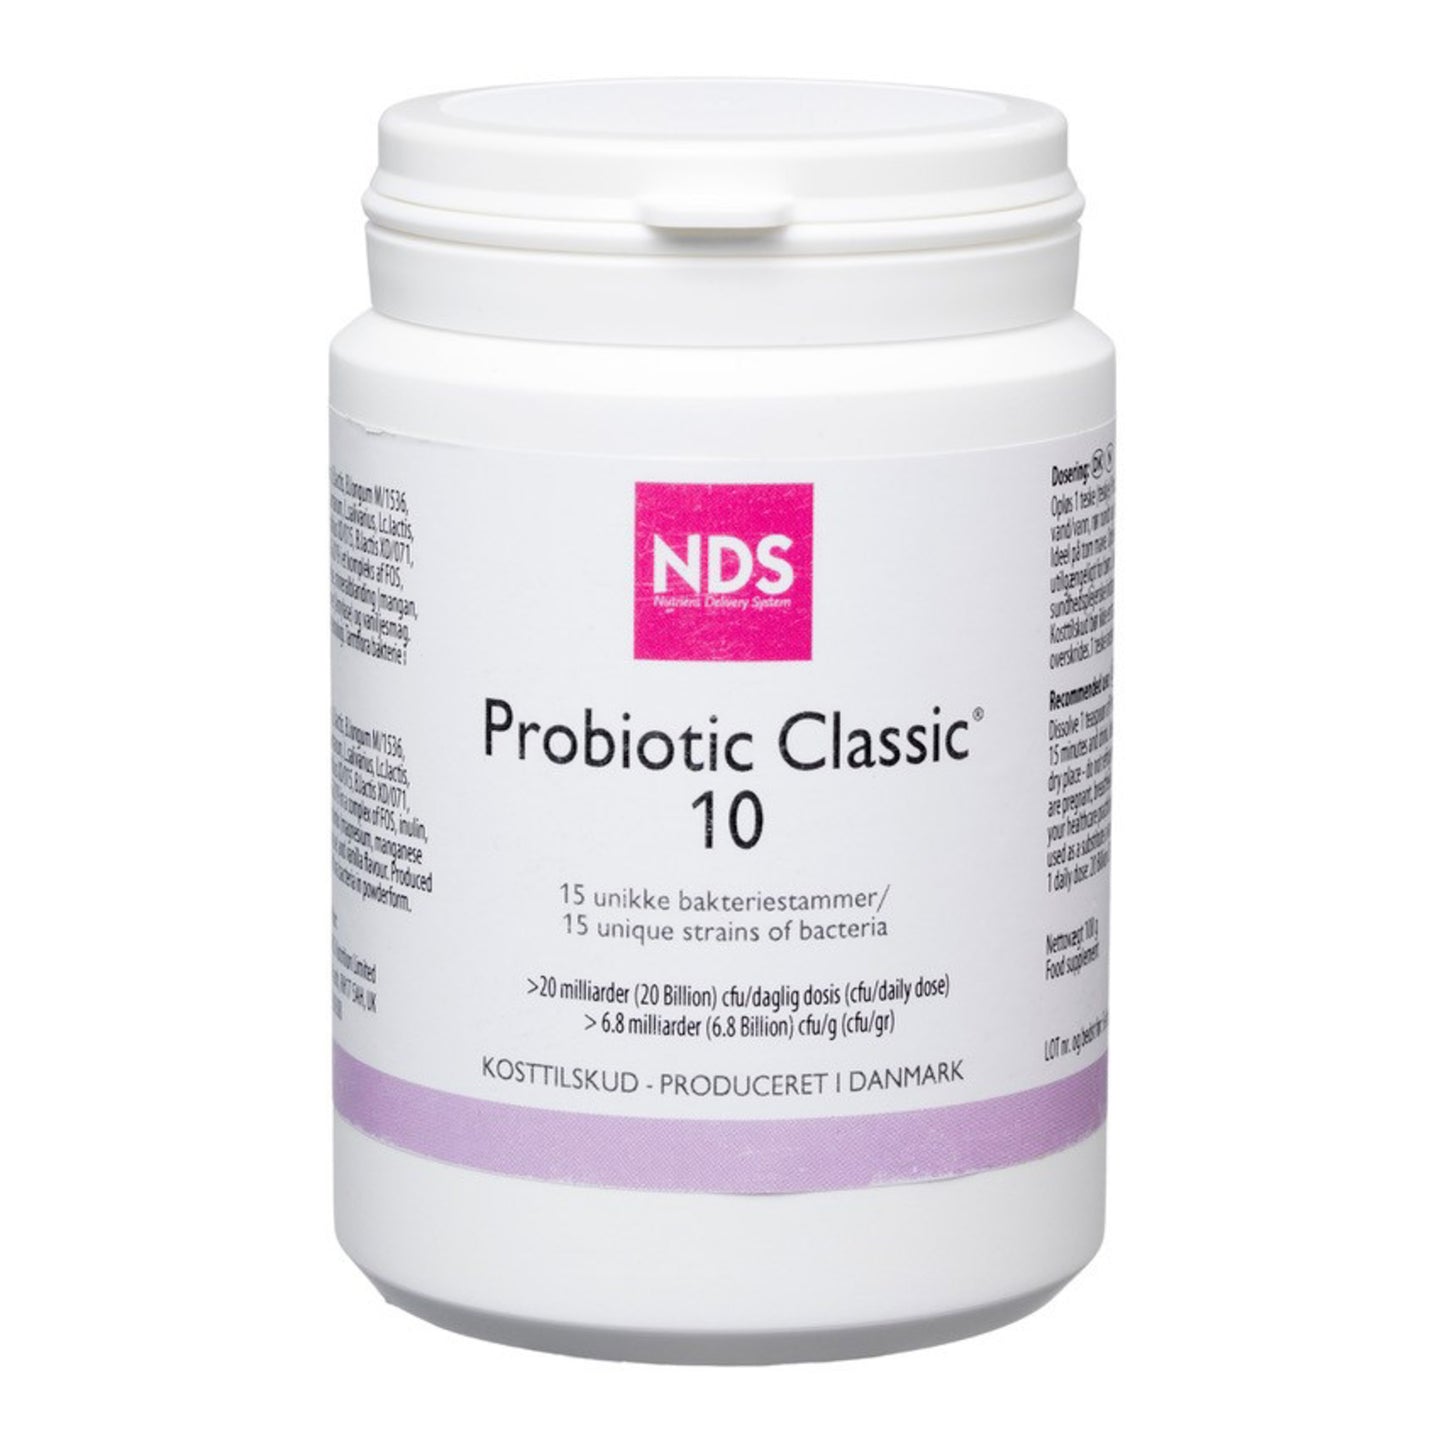 NDS Probiotic Classic 10 100g